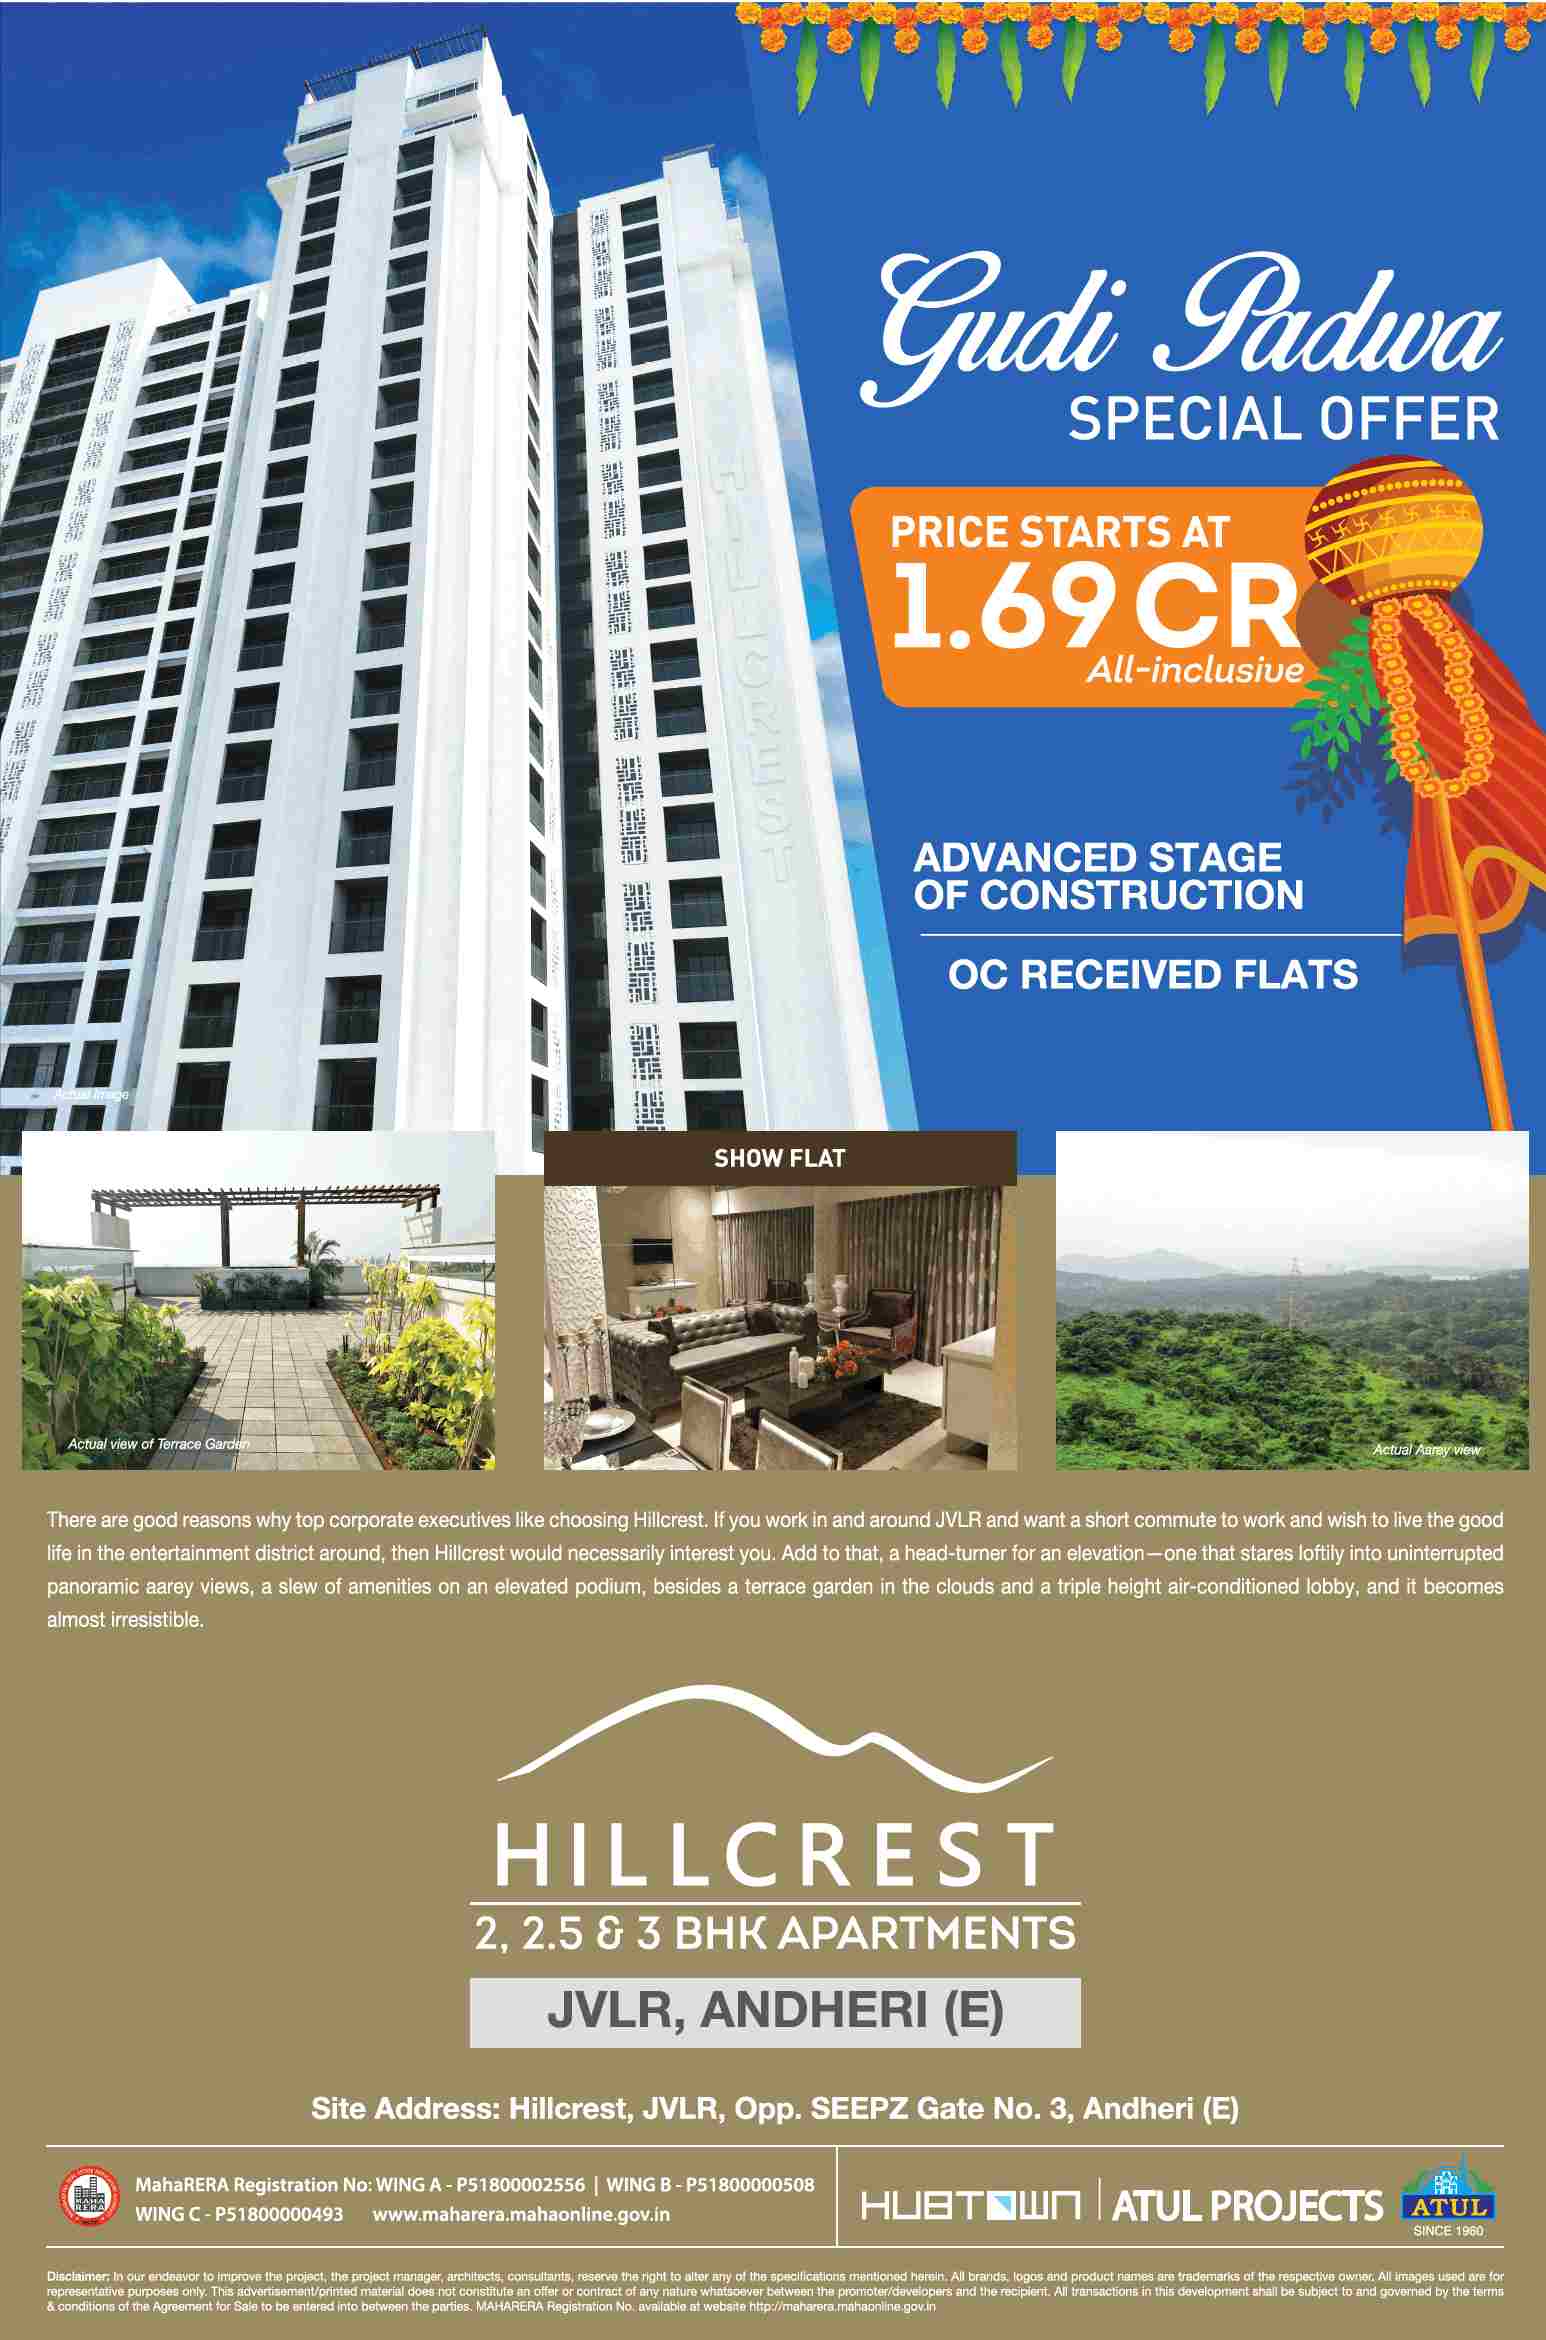 Show flat ready at Hubtown Hillcrest in Mumbai Update